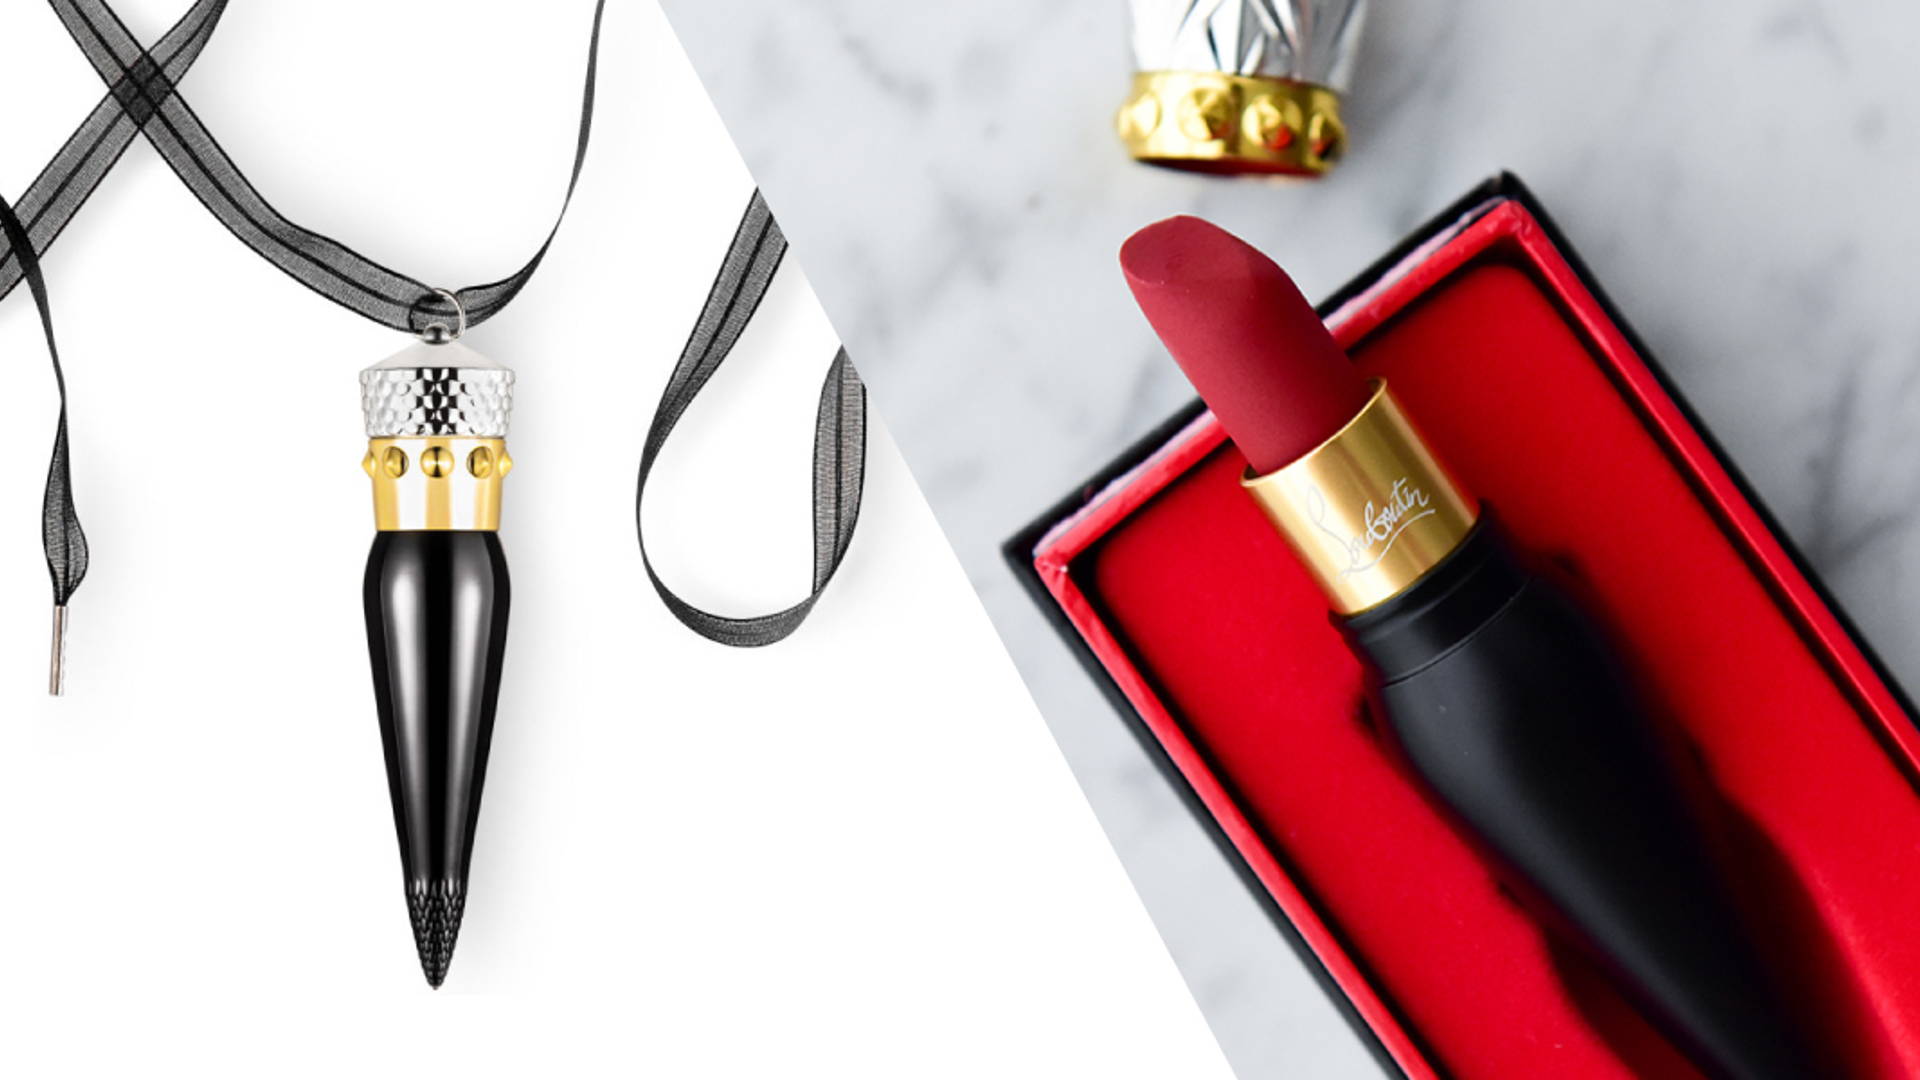 Featured image for Christian Louboutin Lipstick